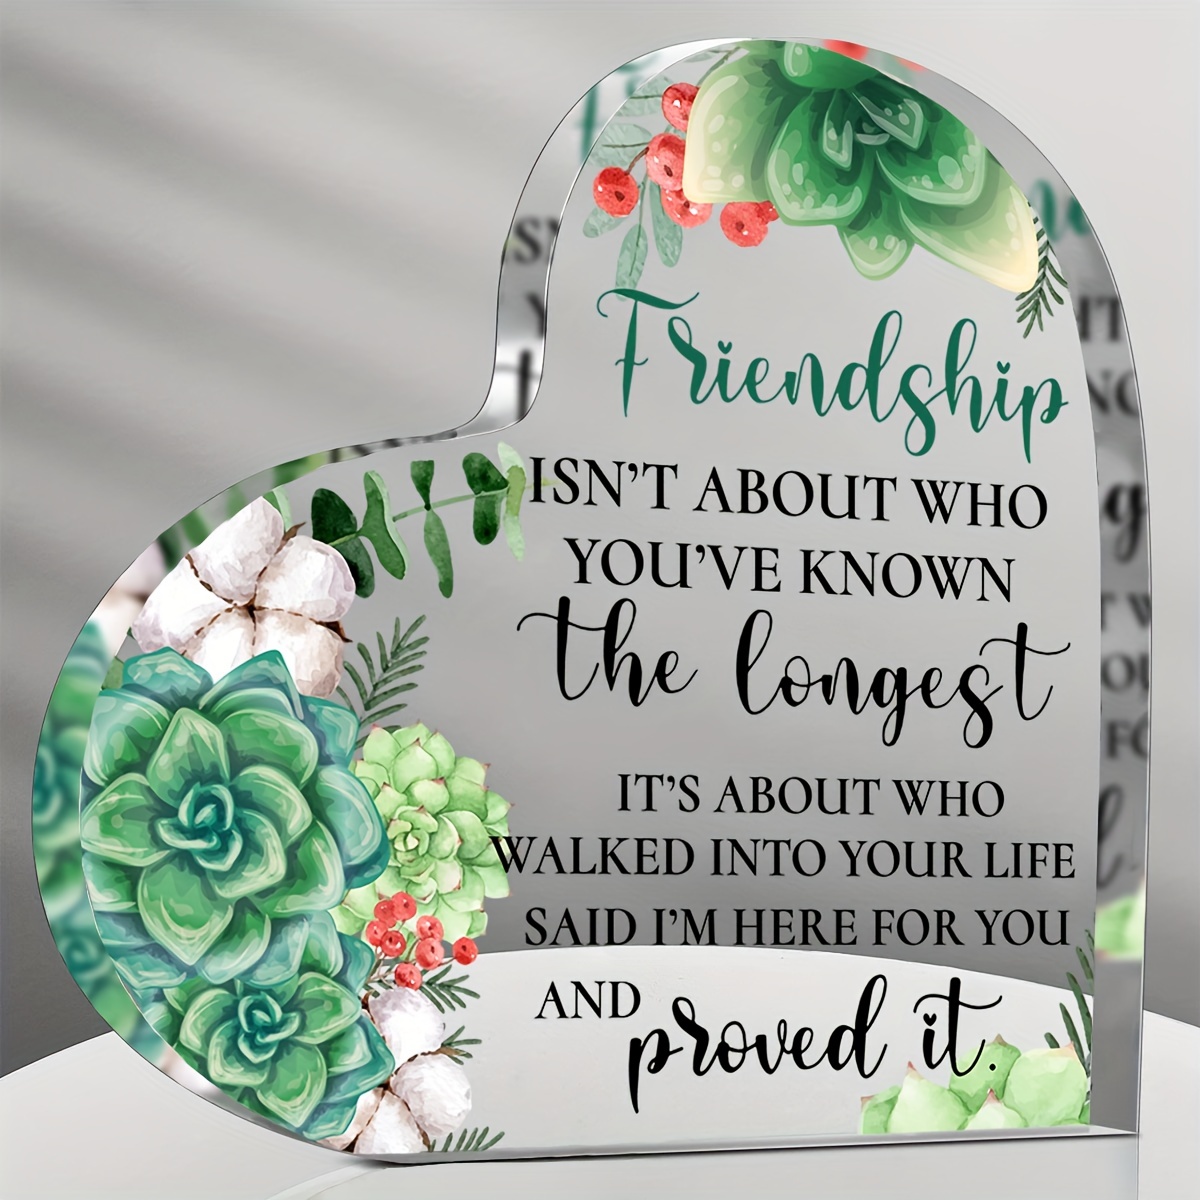 Best Friend Gifts, Birthday Gift for Best Friend, Friendship Gift for  Women, Thank You Gifts for Friends, Thinking of You Gifts for Friends Going